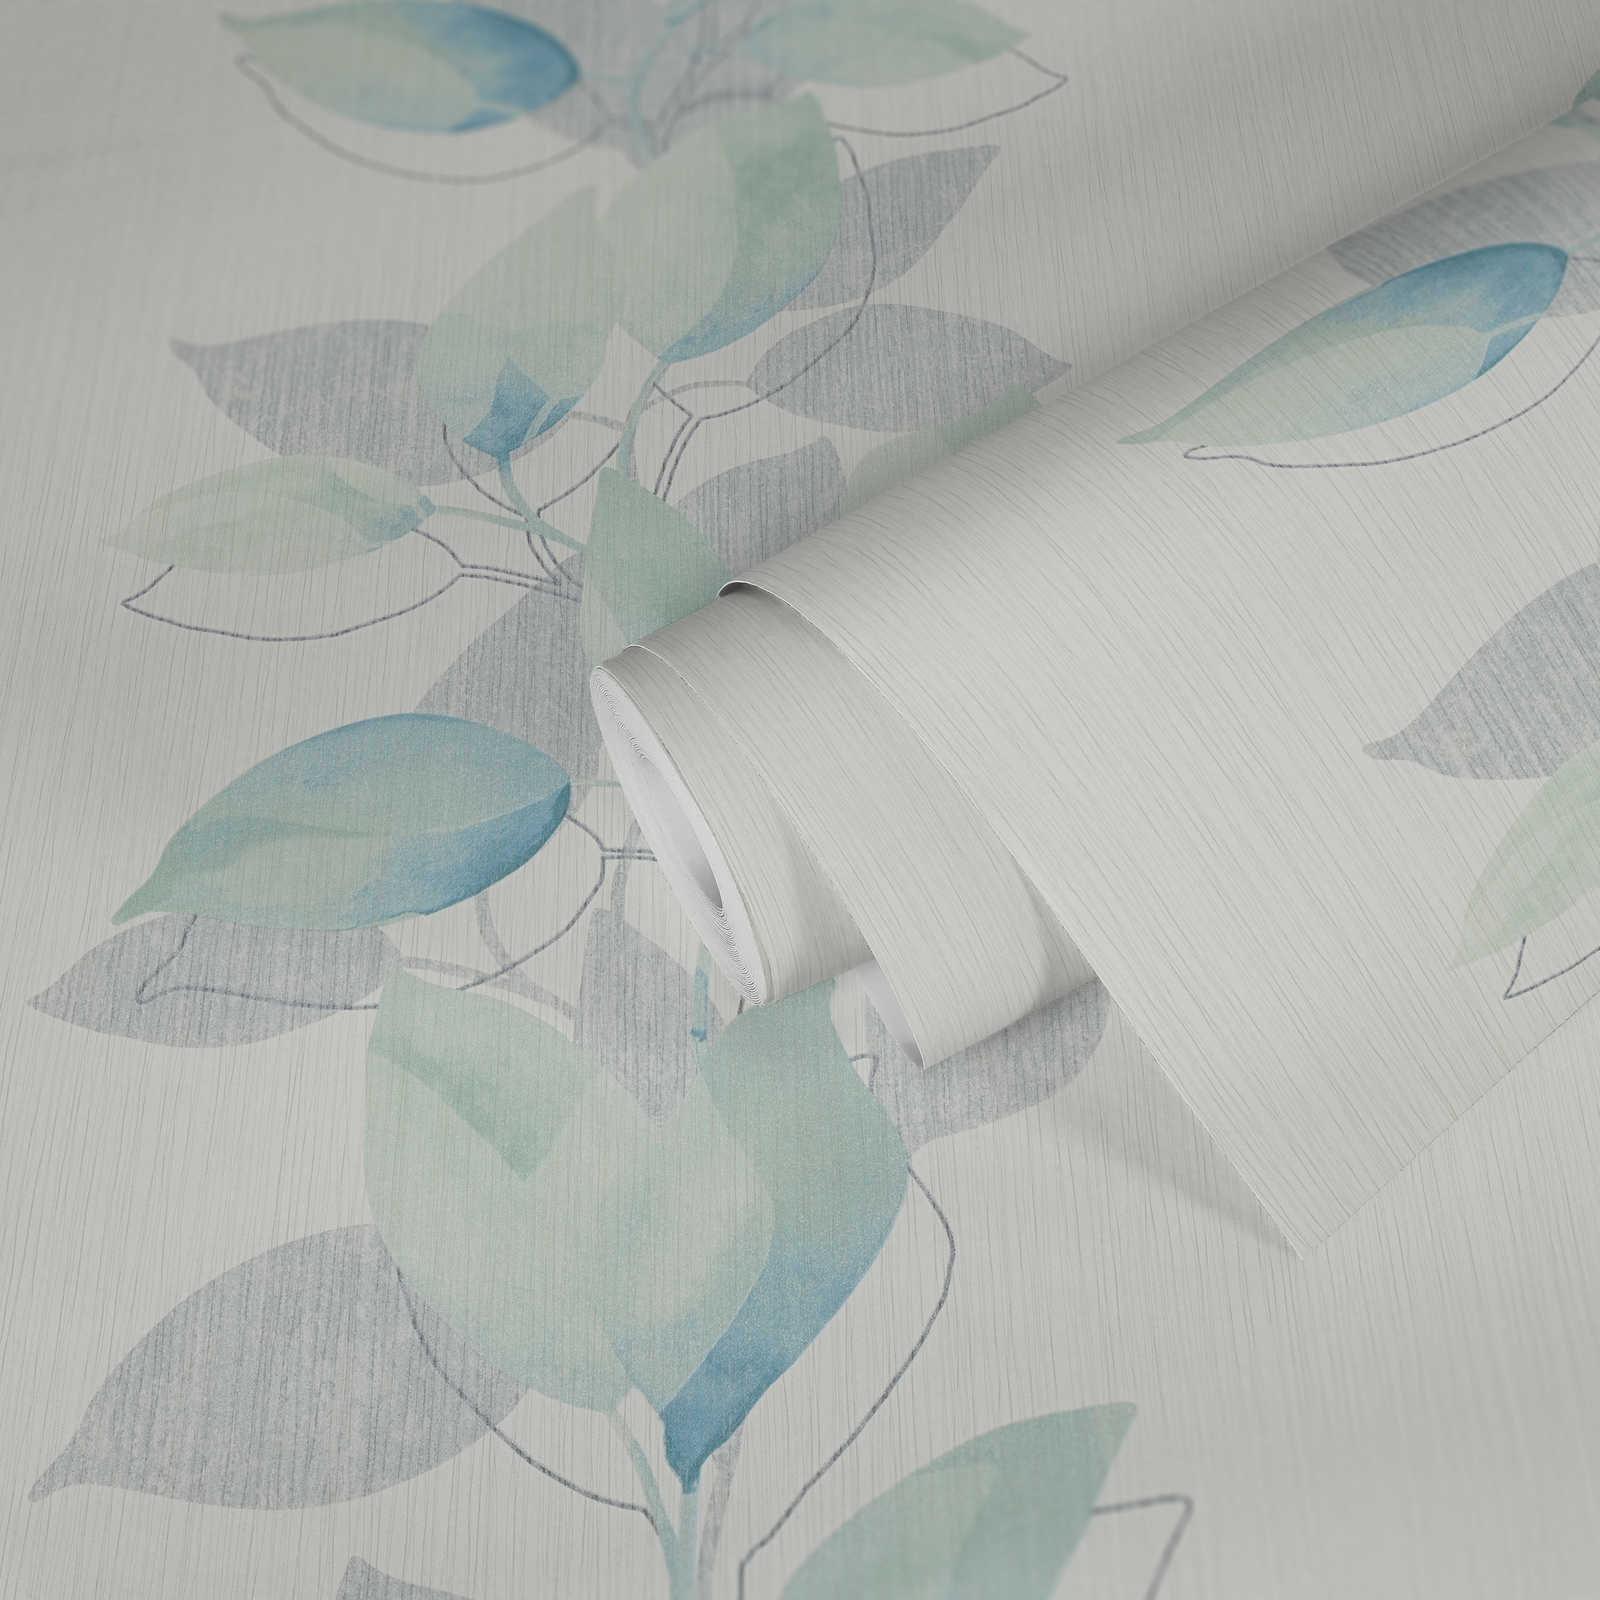             Non-woven wallpaper leaves with watercolour pattern - cream, blue
        